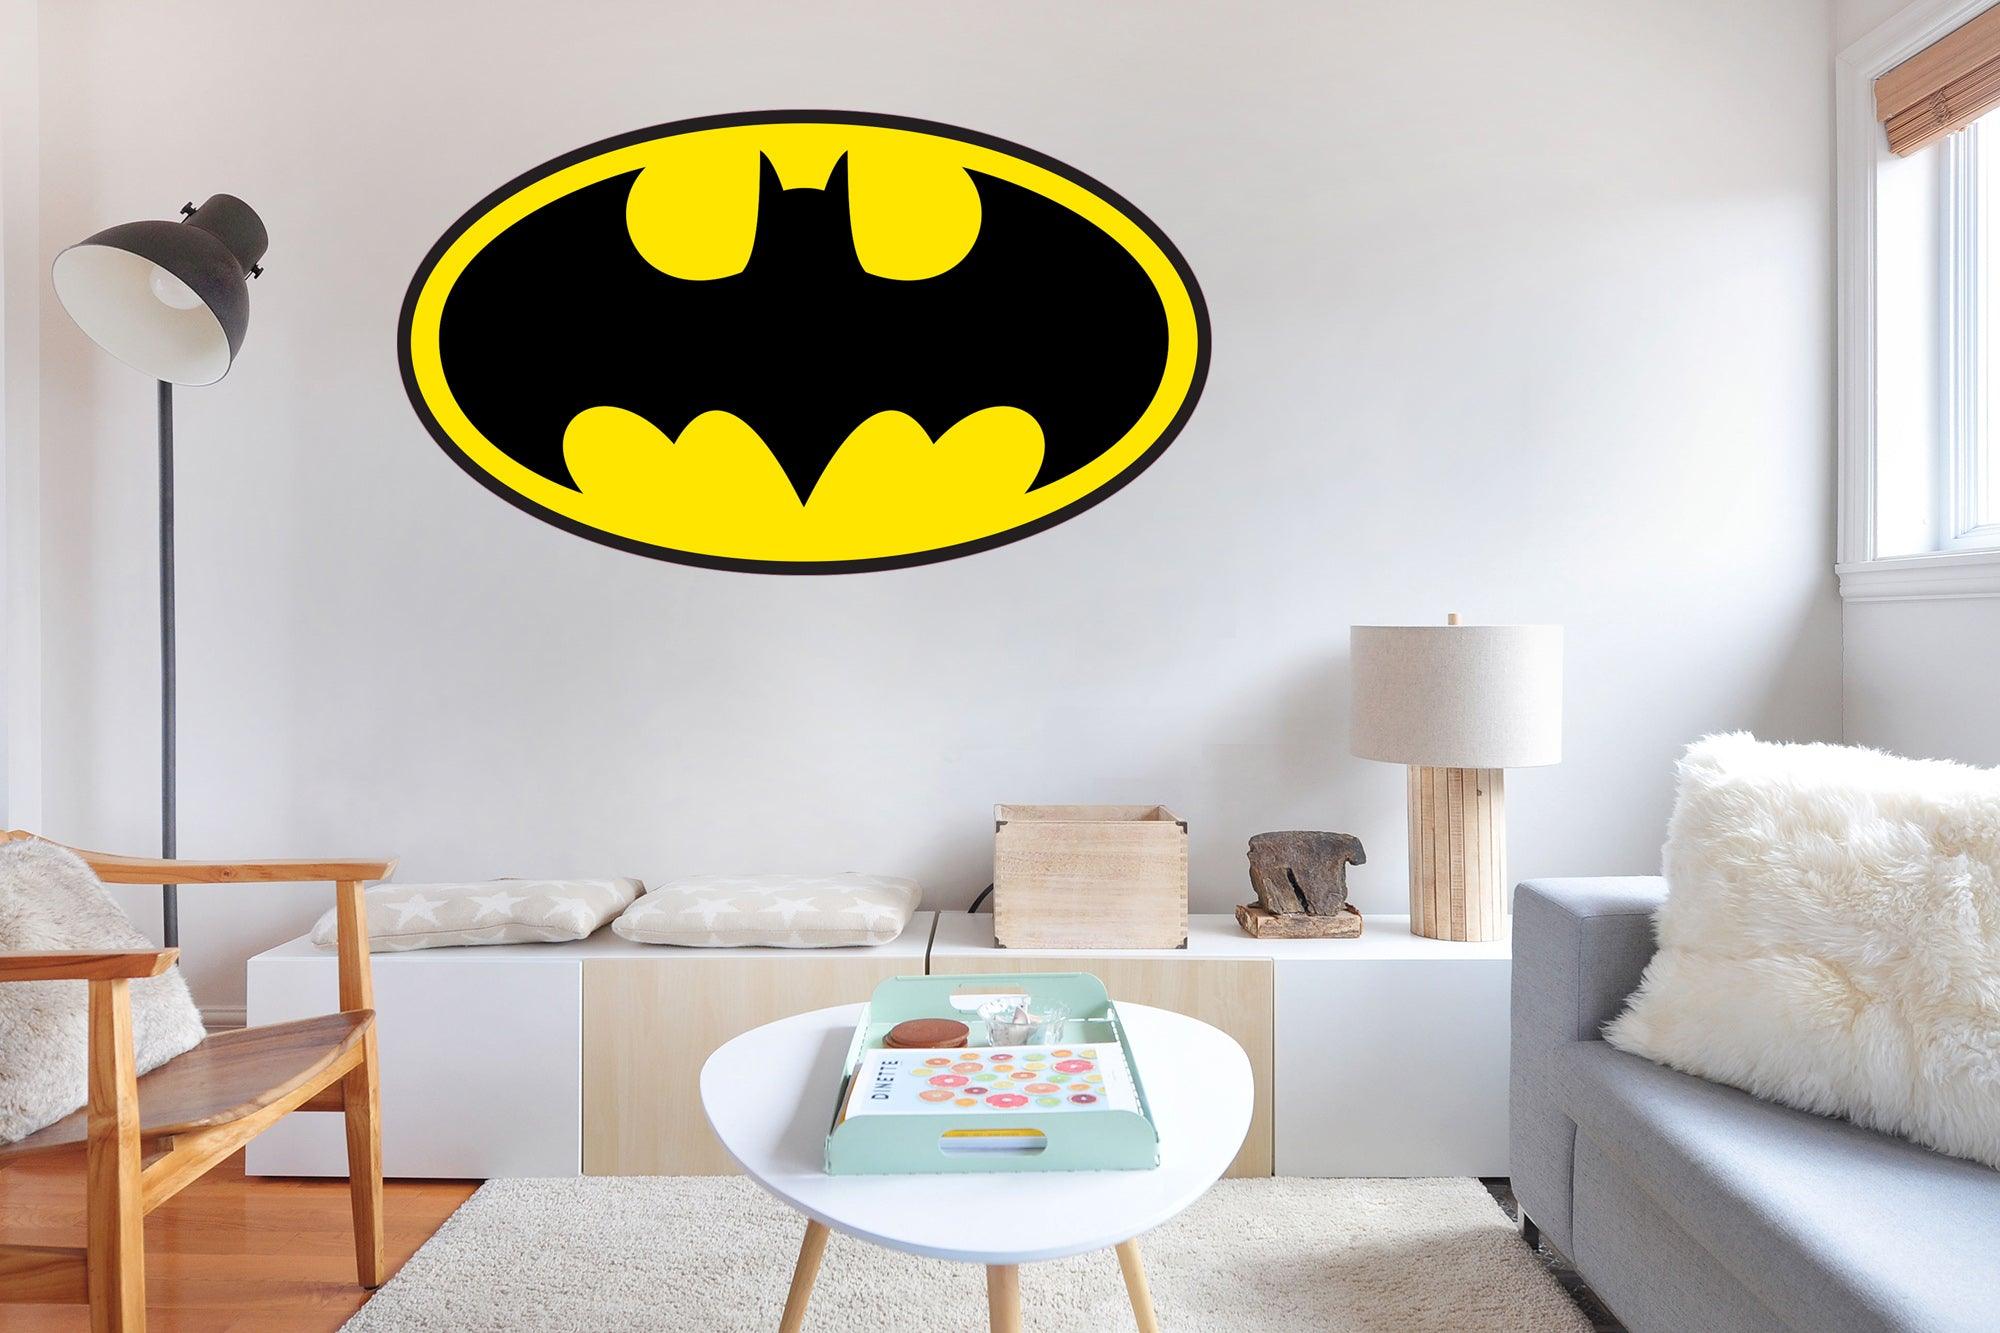 CoolWalls.ca Cars Yellow Round Batman, Wall Decal Sticker, Easy to Peel-N-Stick